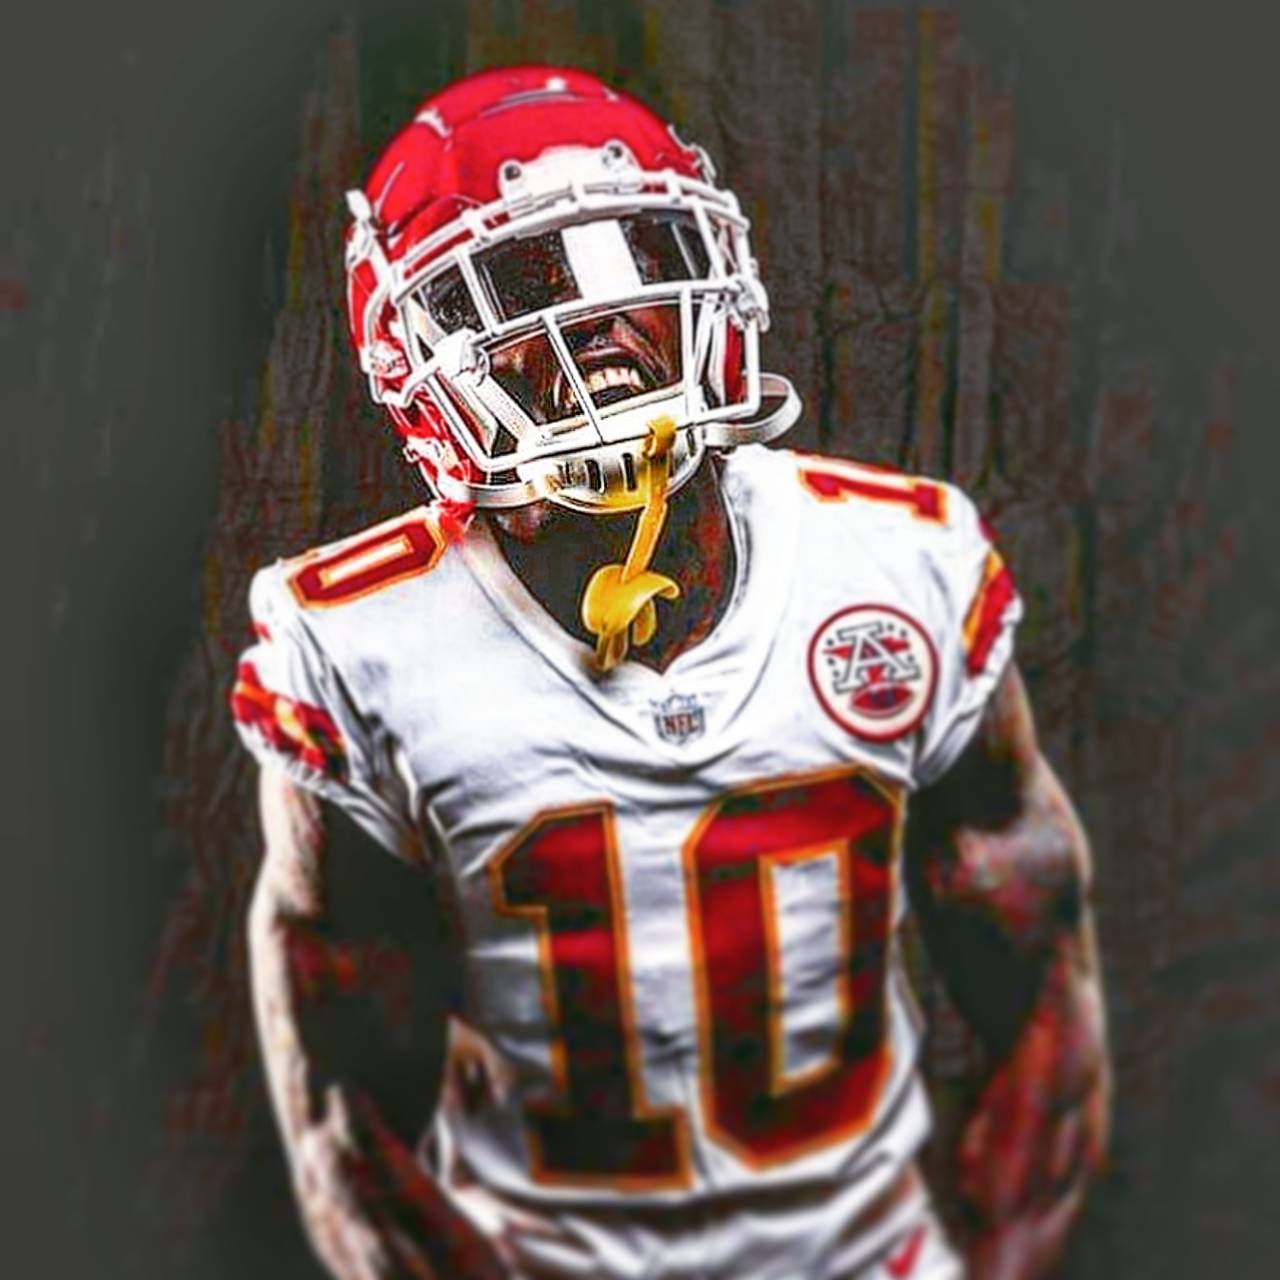 Pro Bowl Specialist Tyreek Hill Is Showing Victory Sign In Red Background  HD Tyreek Hill Wallpapers  HD Wallpapers  ID 55682